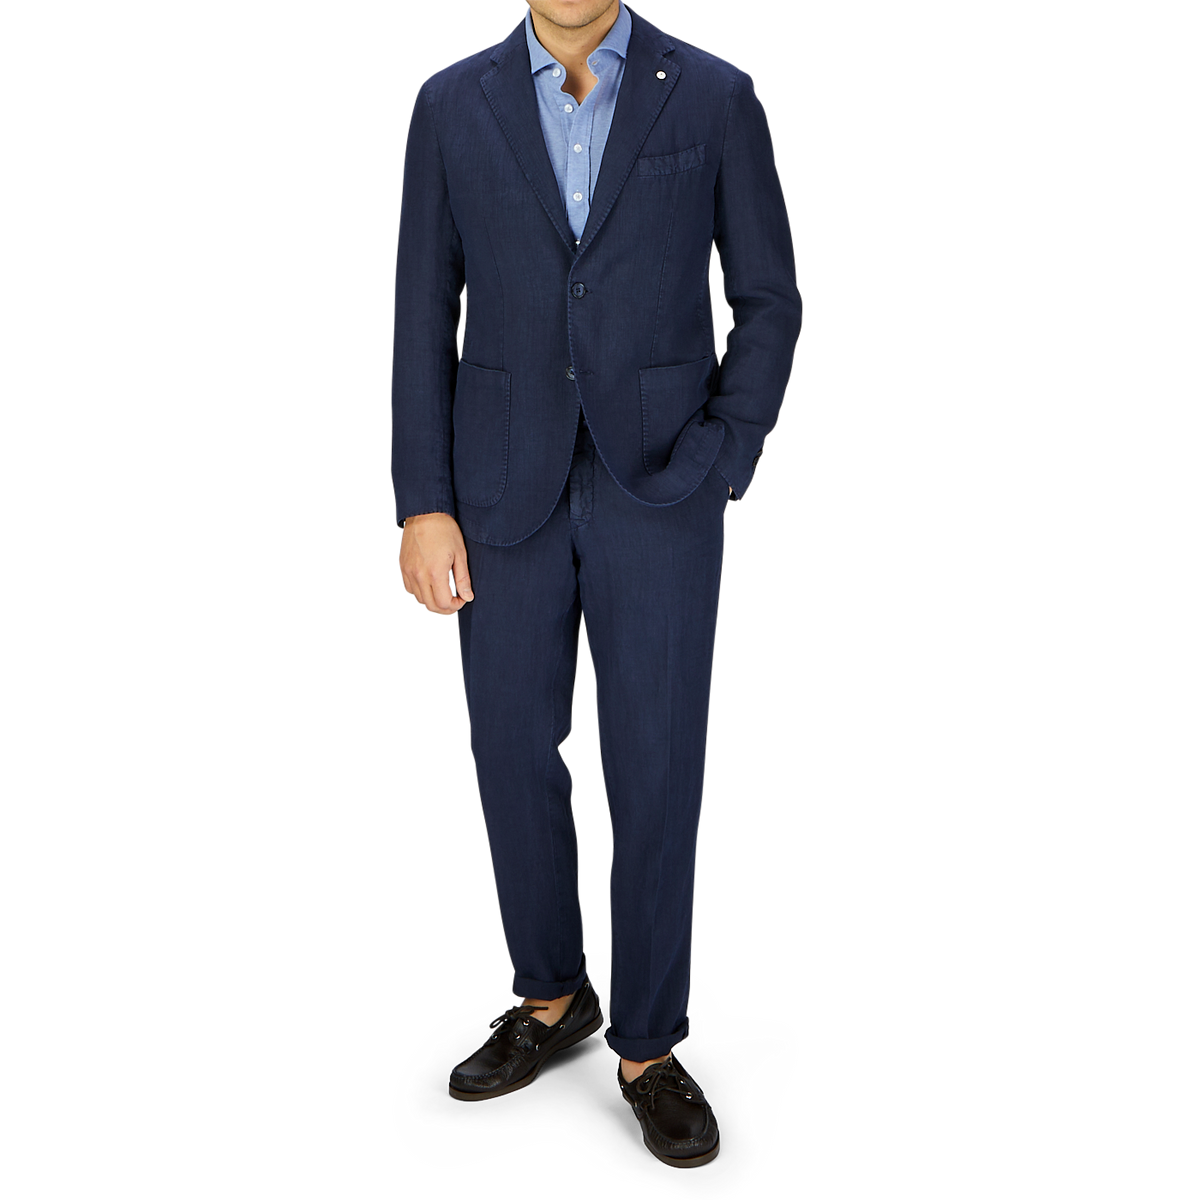 A man stands wearing a L.B.M. 1911 navy blue washed linen suit, blue shirt, and brown shoes, with his left hand in his pocket, against a grey background.